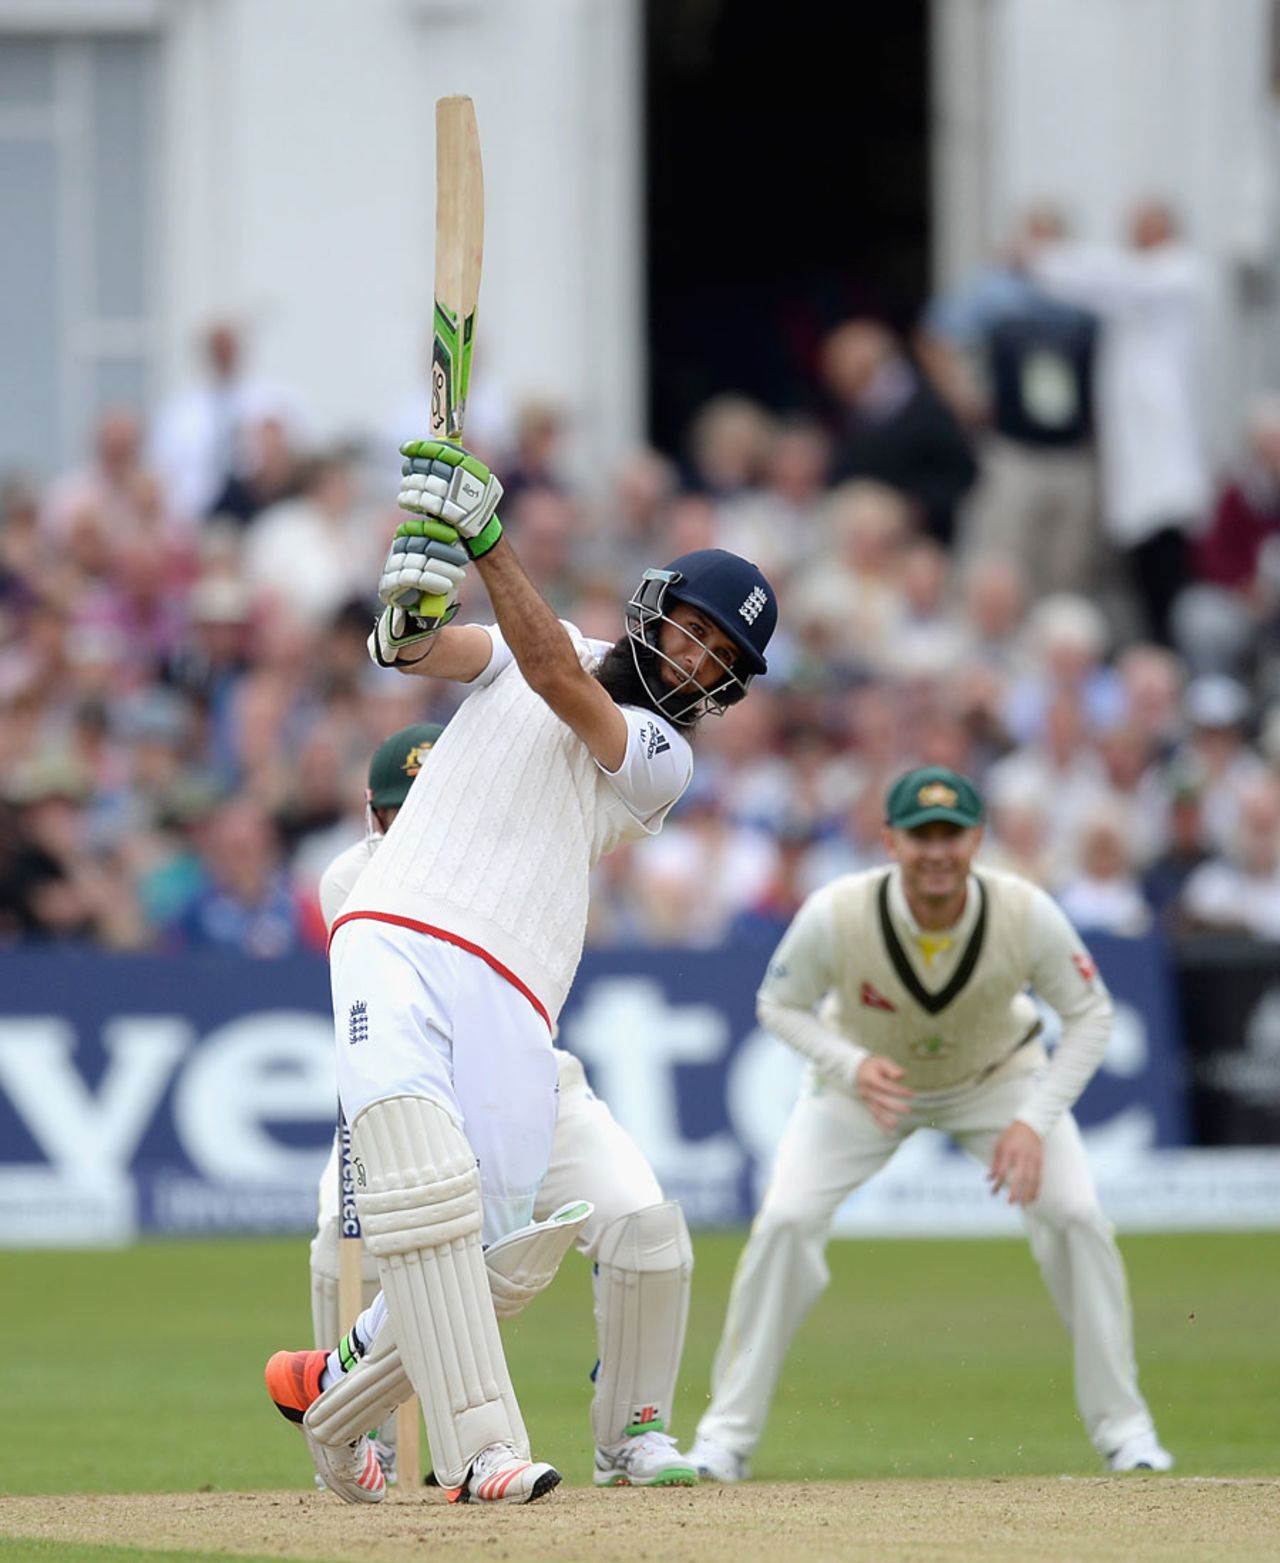 Moeen Ali played his shots to swell the lead, England v Australia, 4th Investec Test, Trent Bridge, 2nd day, August 7, 2015